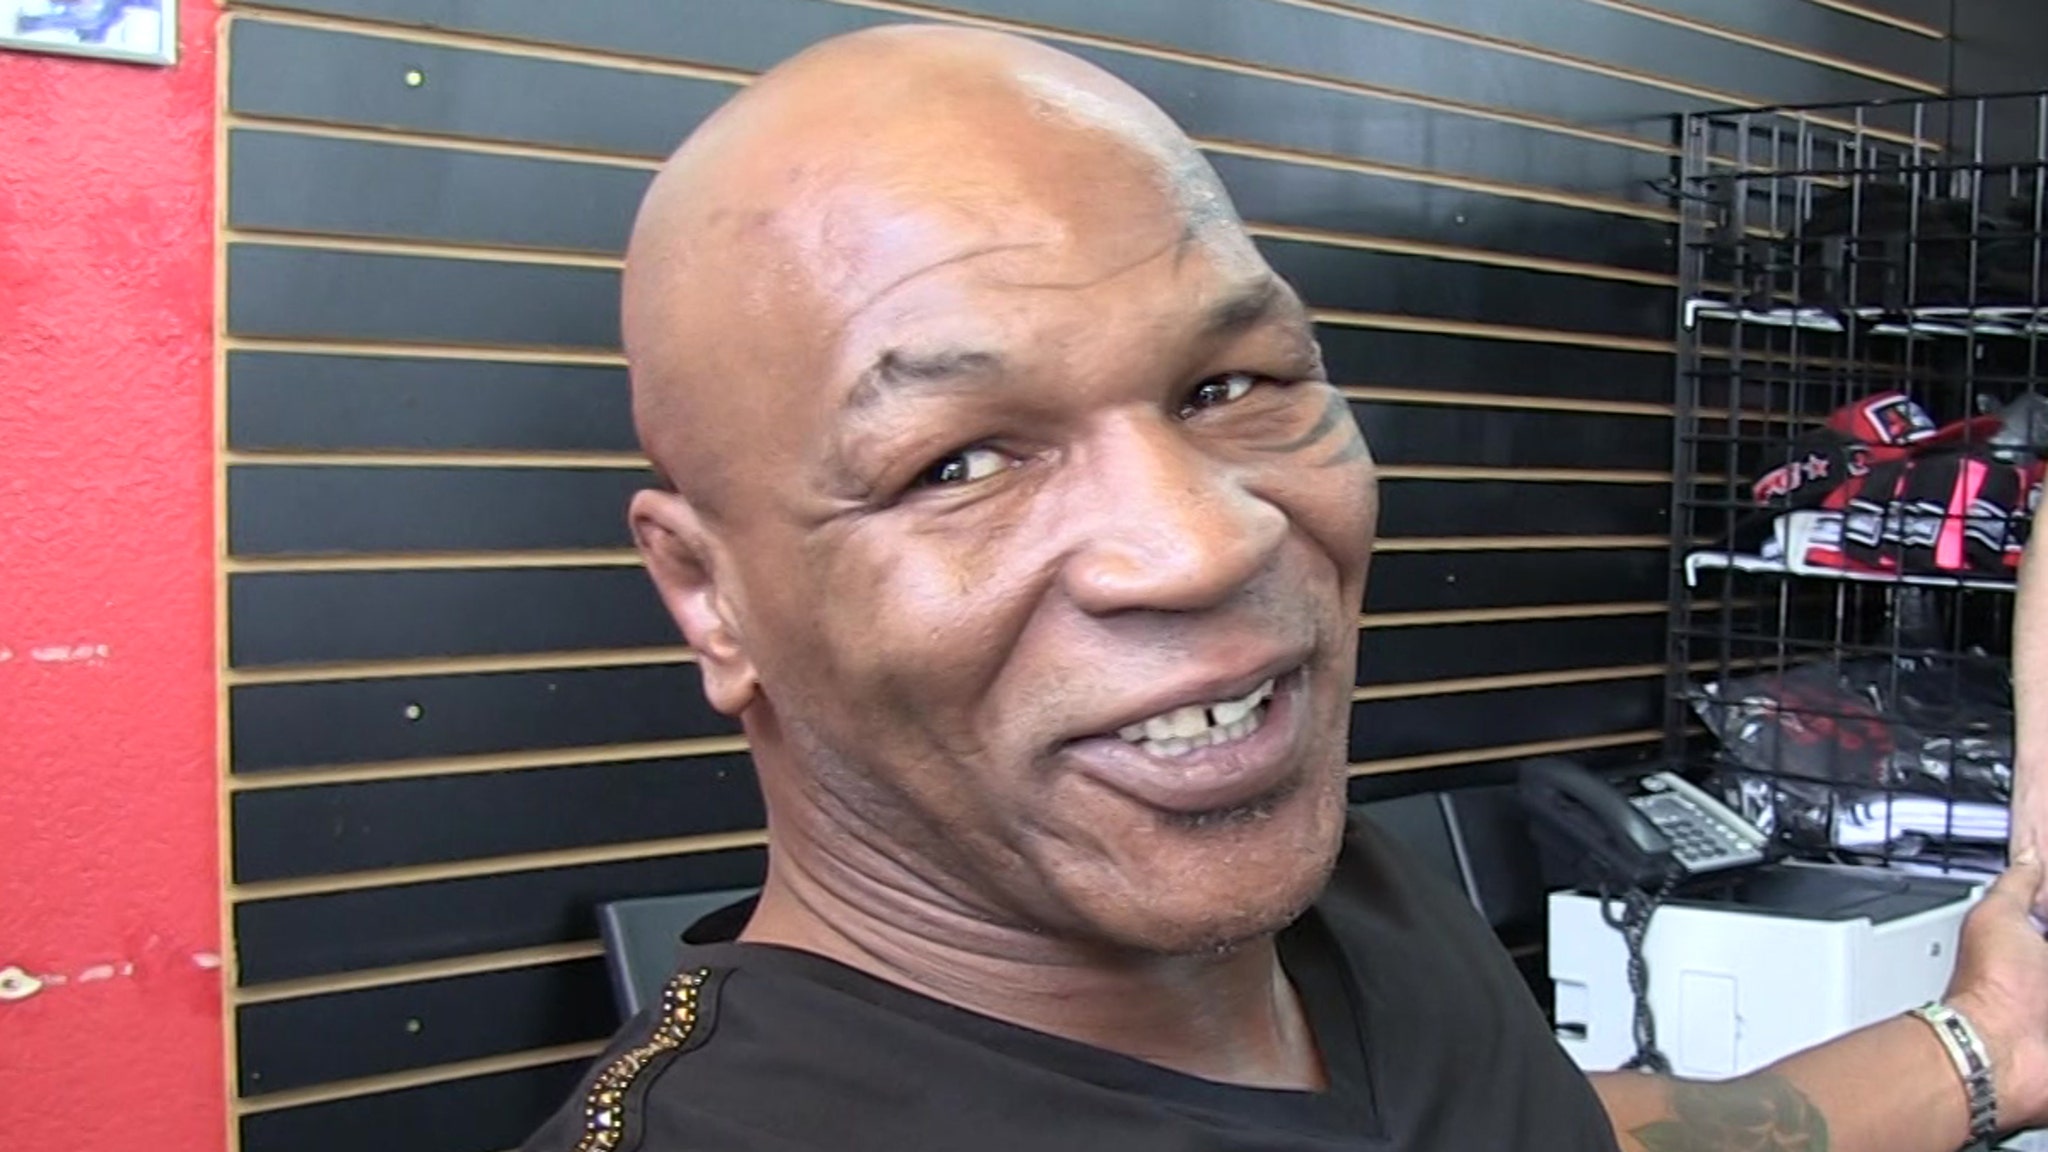 Mike Tyson Says He’s ‘Now Feeling 100%’ After Airplane Health Scare